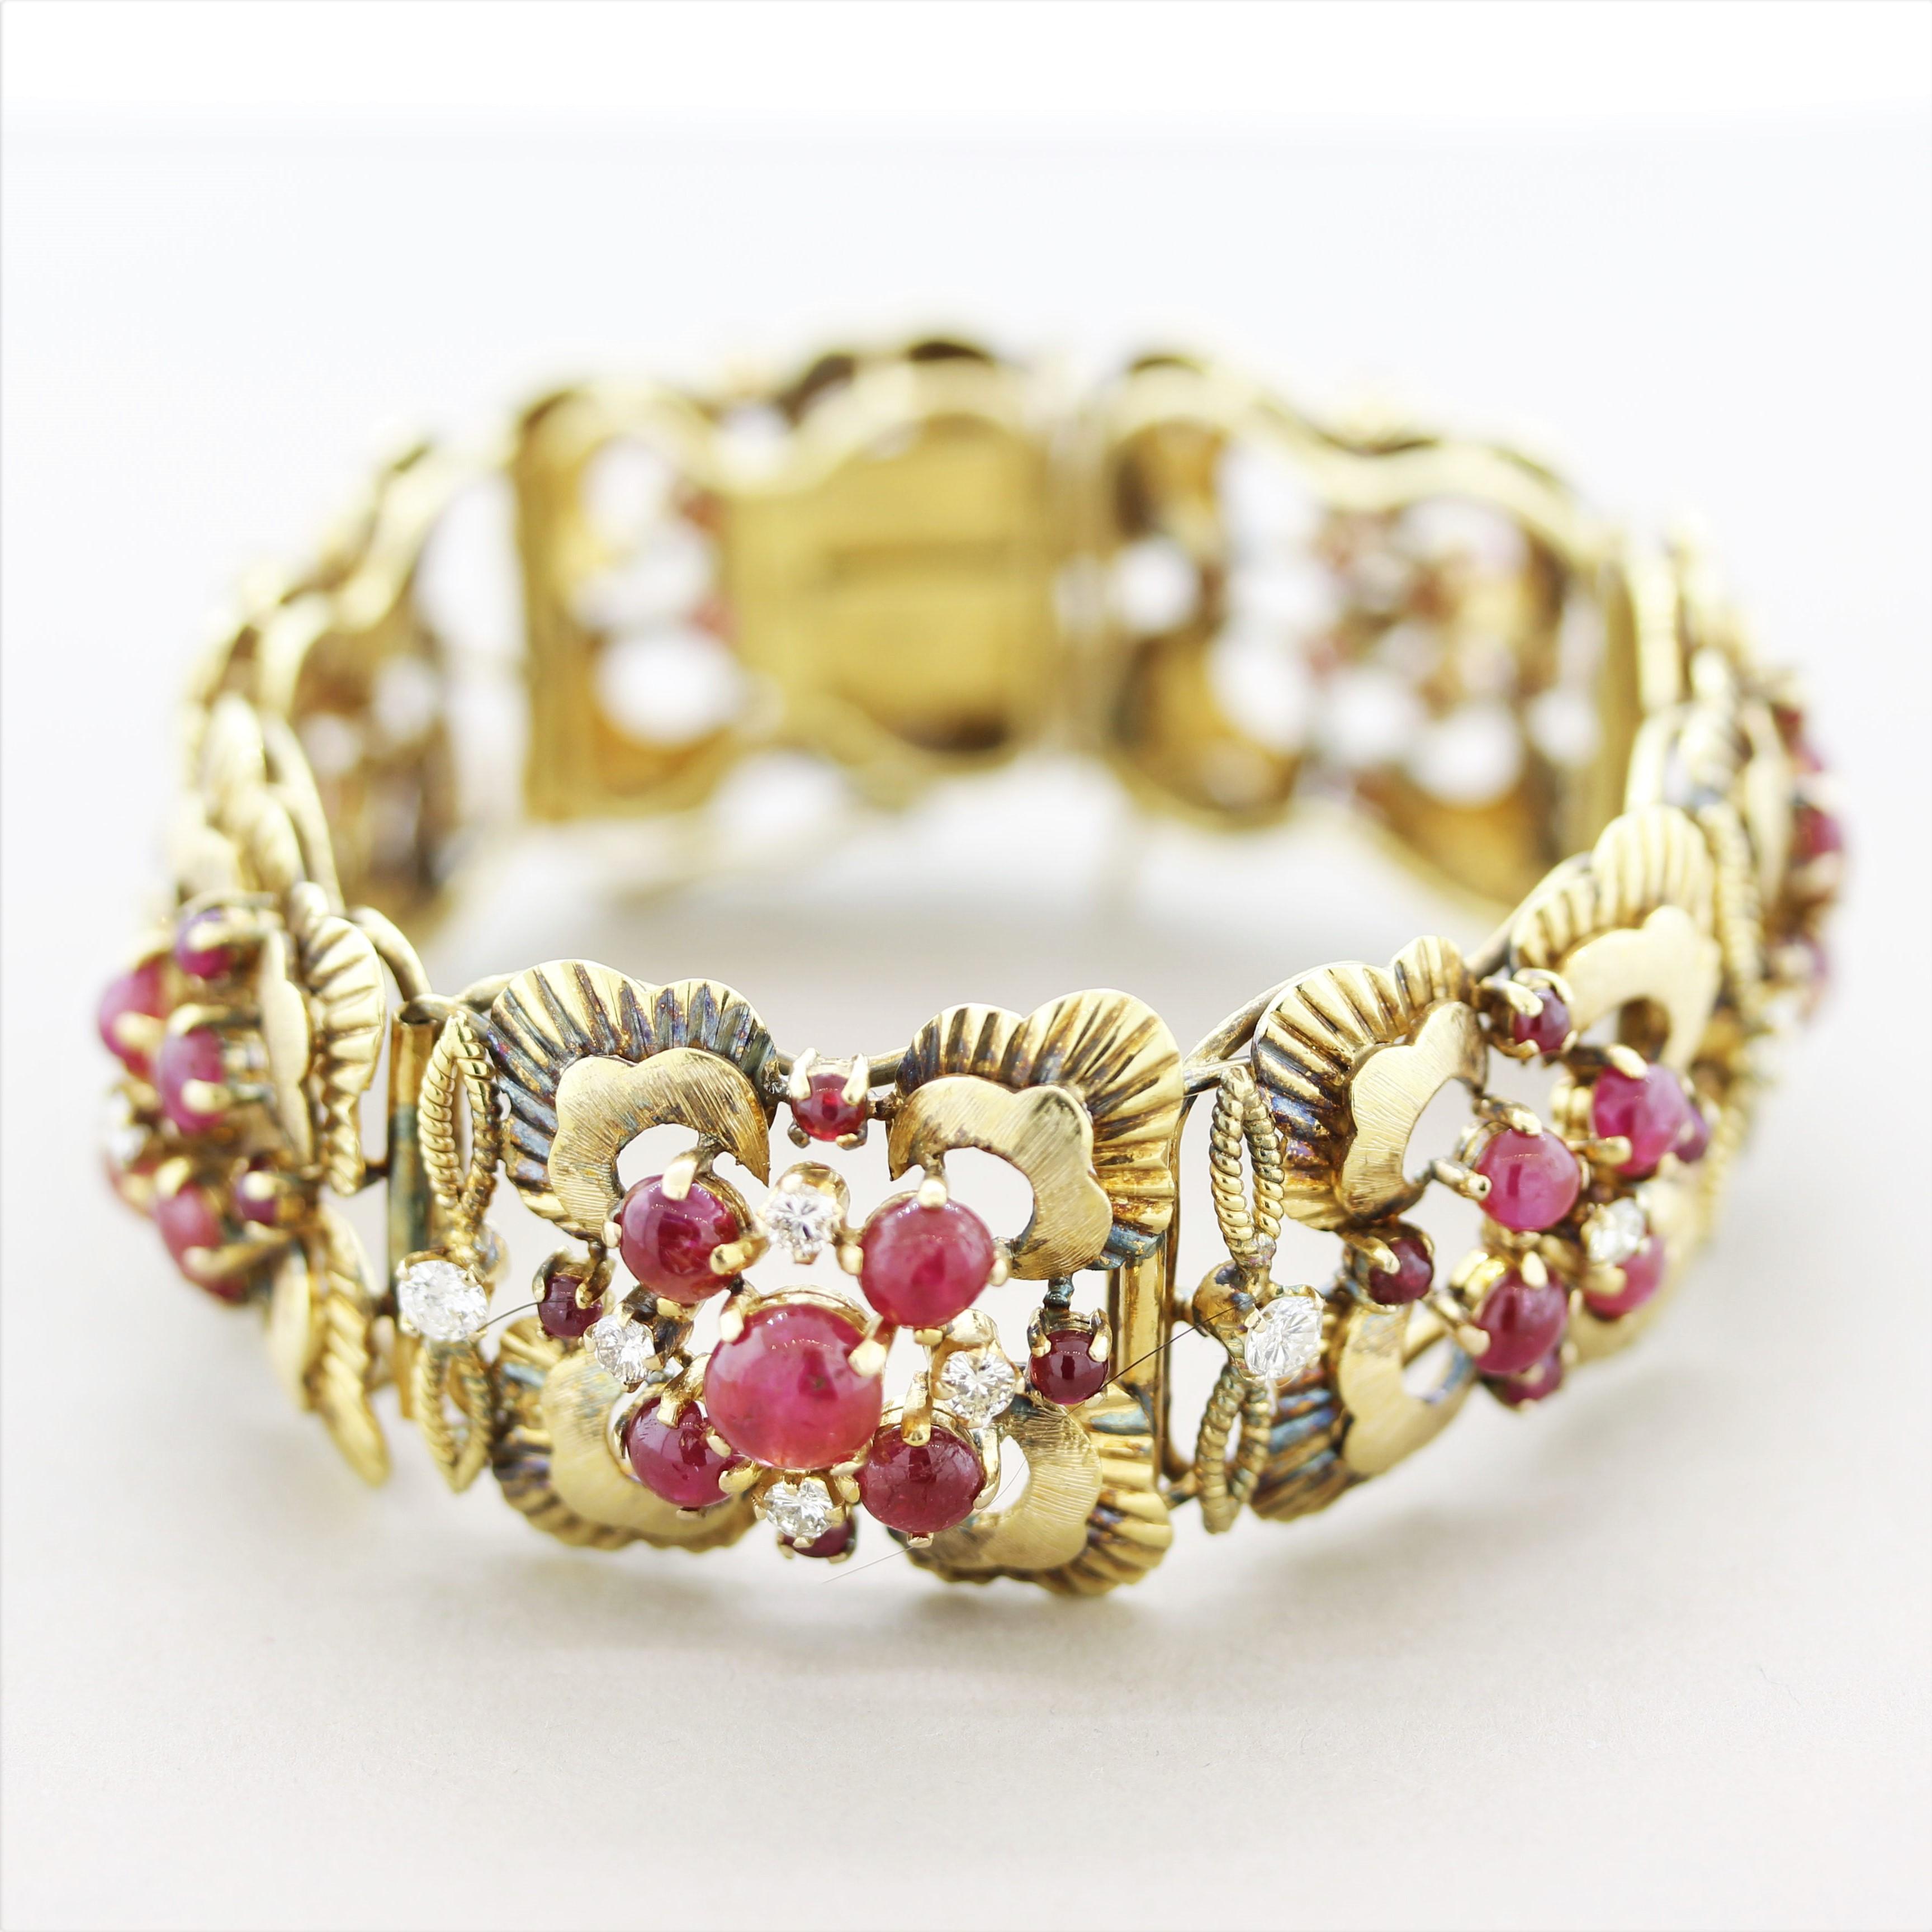 A retro piece, circa 1940’s, dazzled in rubies and diamonds! The bracelet features approximately 9 carats of cabochon rubies and 1.50 carats of fine round brilliant-cut diamonds which are all set across the bracelet in a floral pattern. The gold has